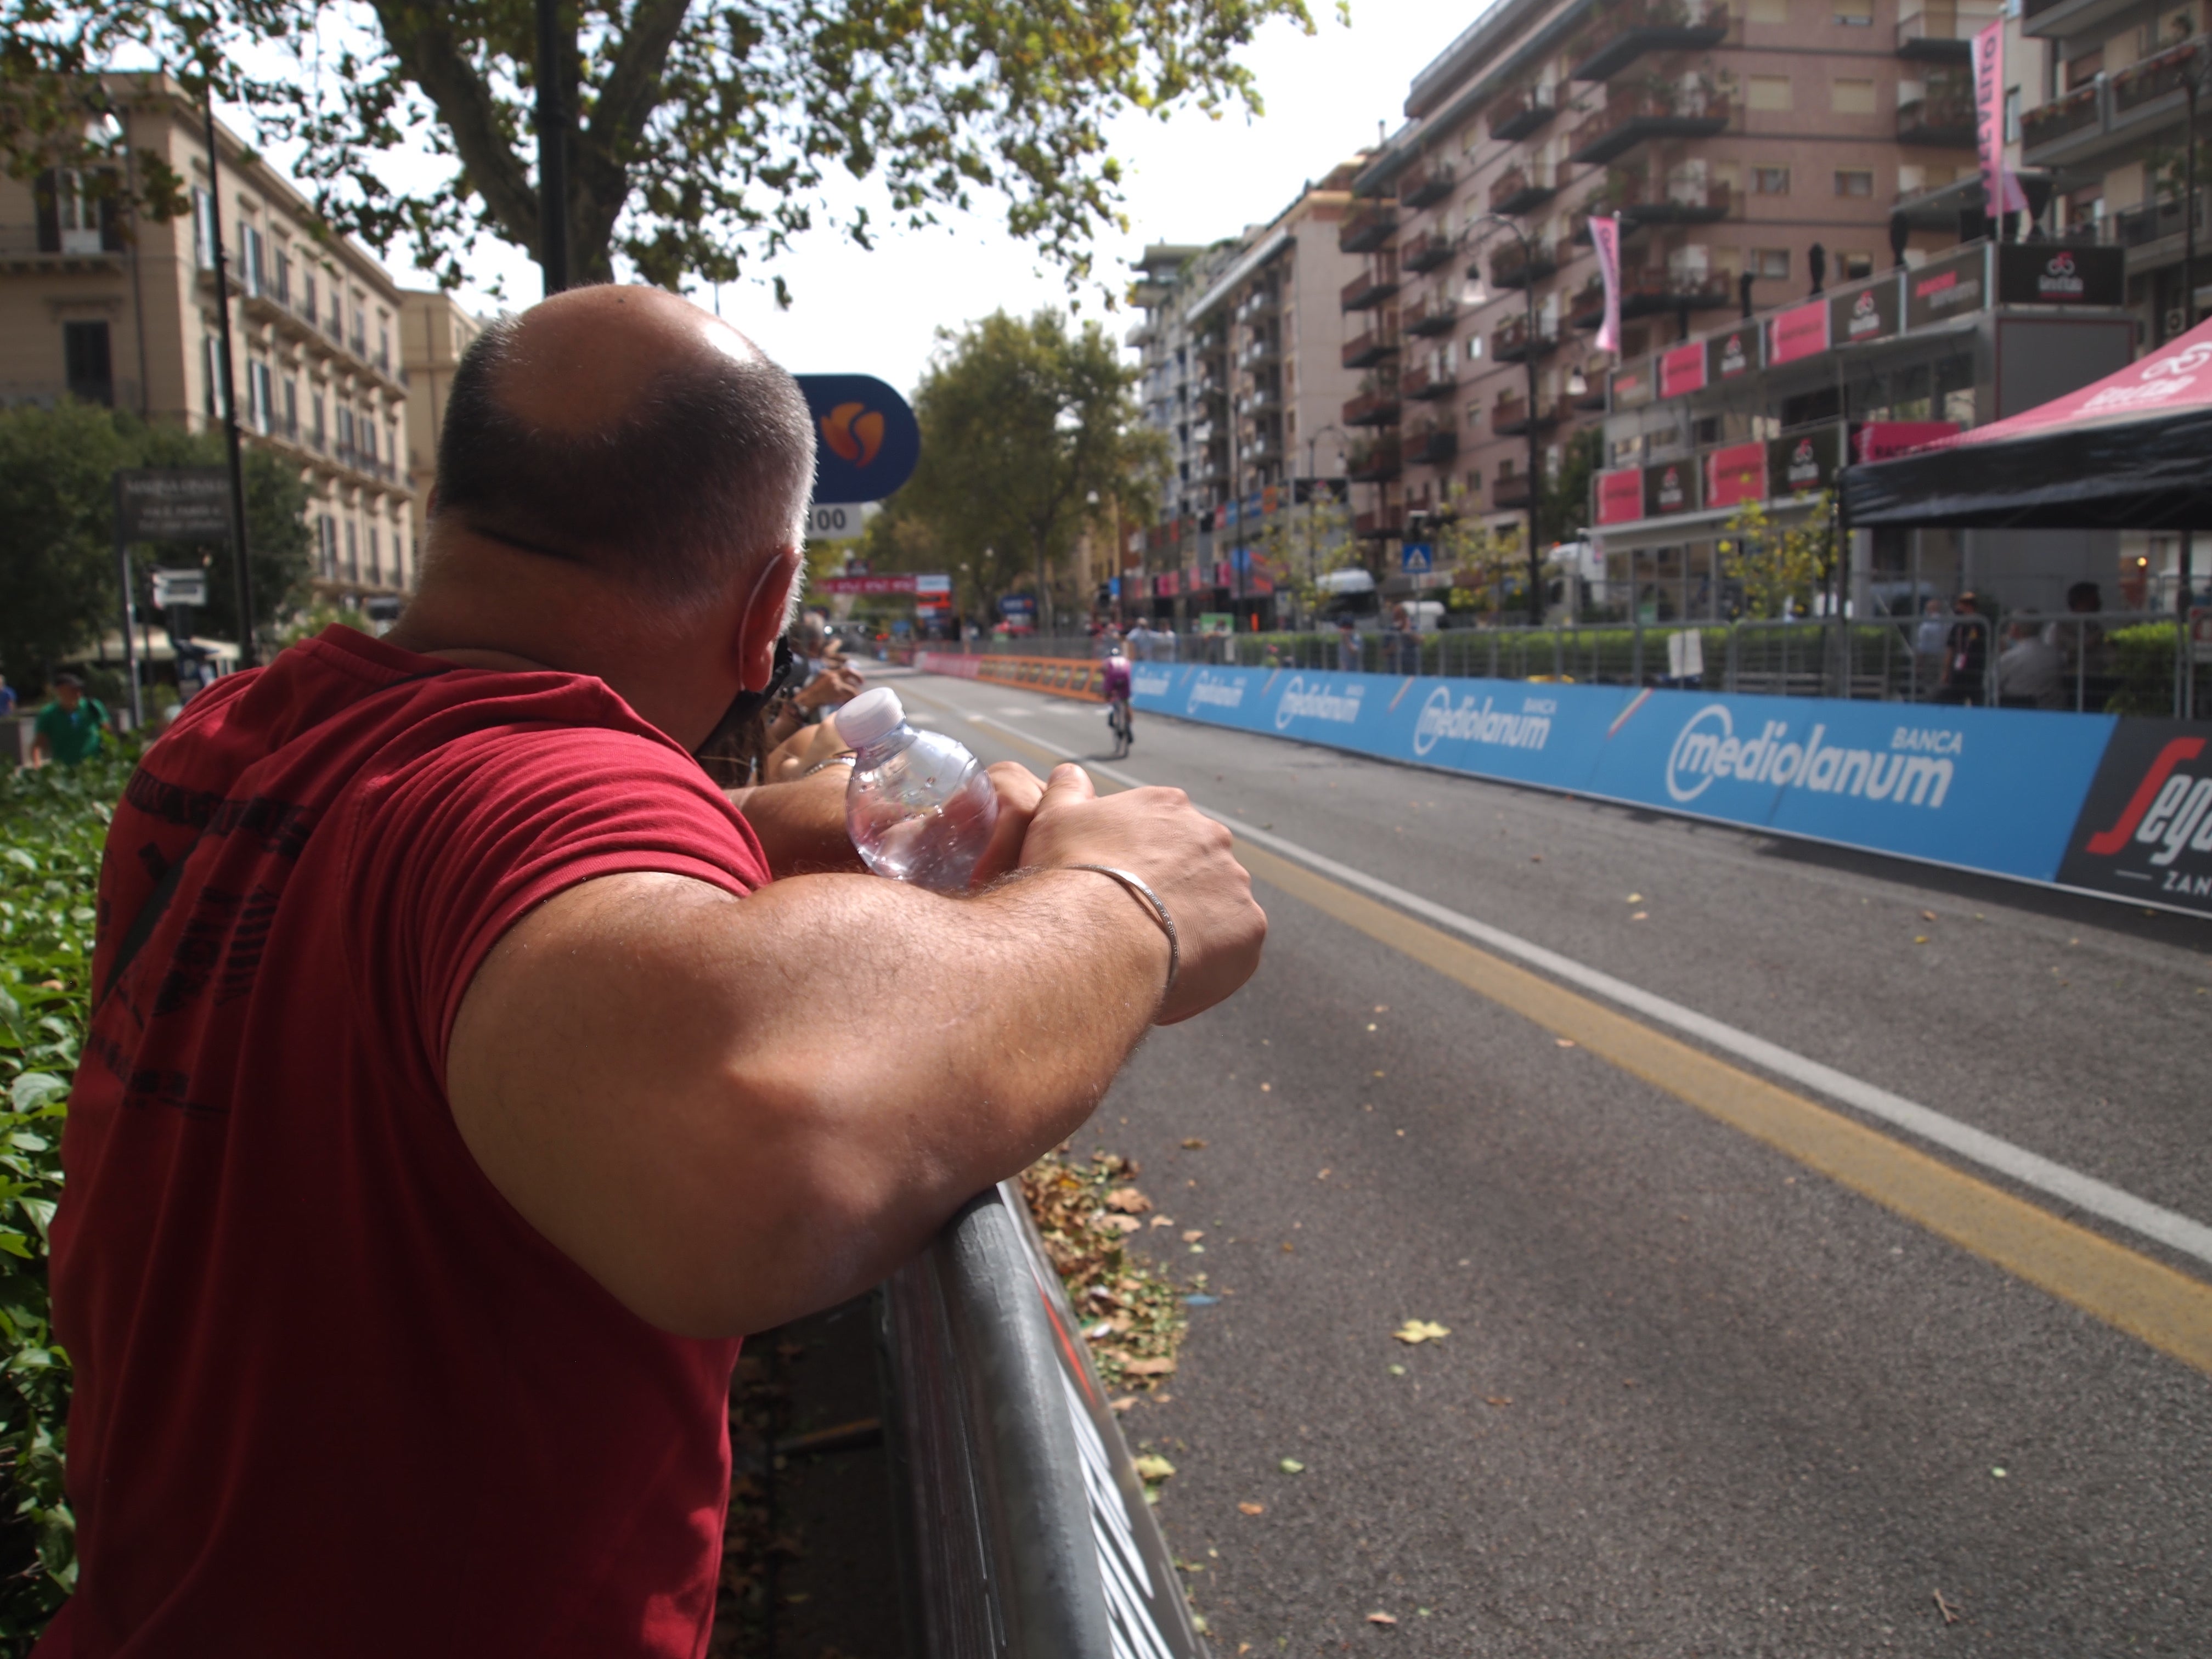 Near the finish line of stage one of the Giro d’Italia 2020